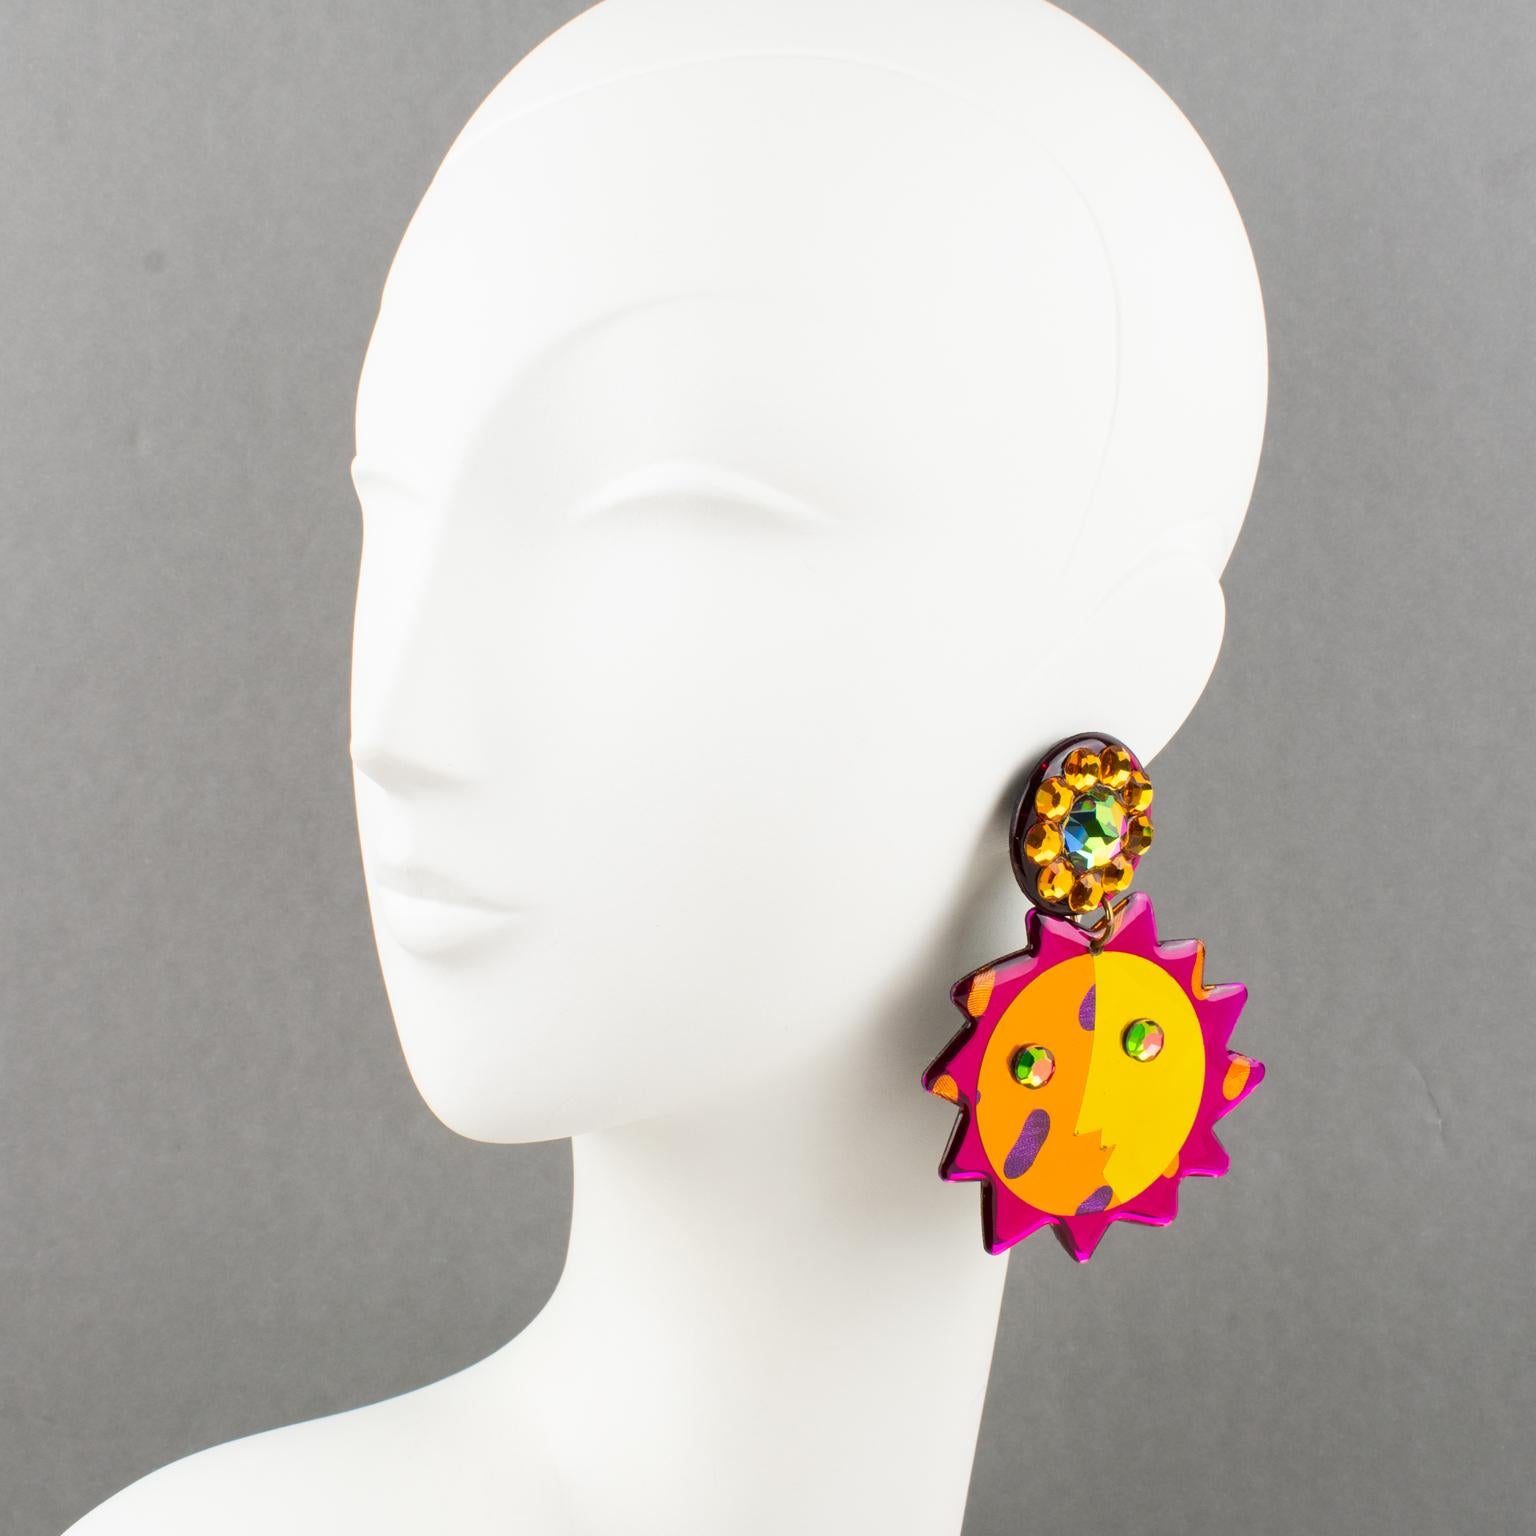 These stunning Italian designer studio Lucite or Resin dangling clip-on earrings feature an oversized stylized sun design shape with an incredibly playful and glittering textured pattern. The pieces boast an electrizing palette with fuchsia pink,